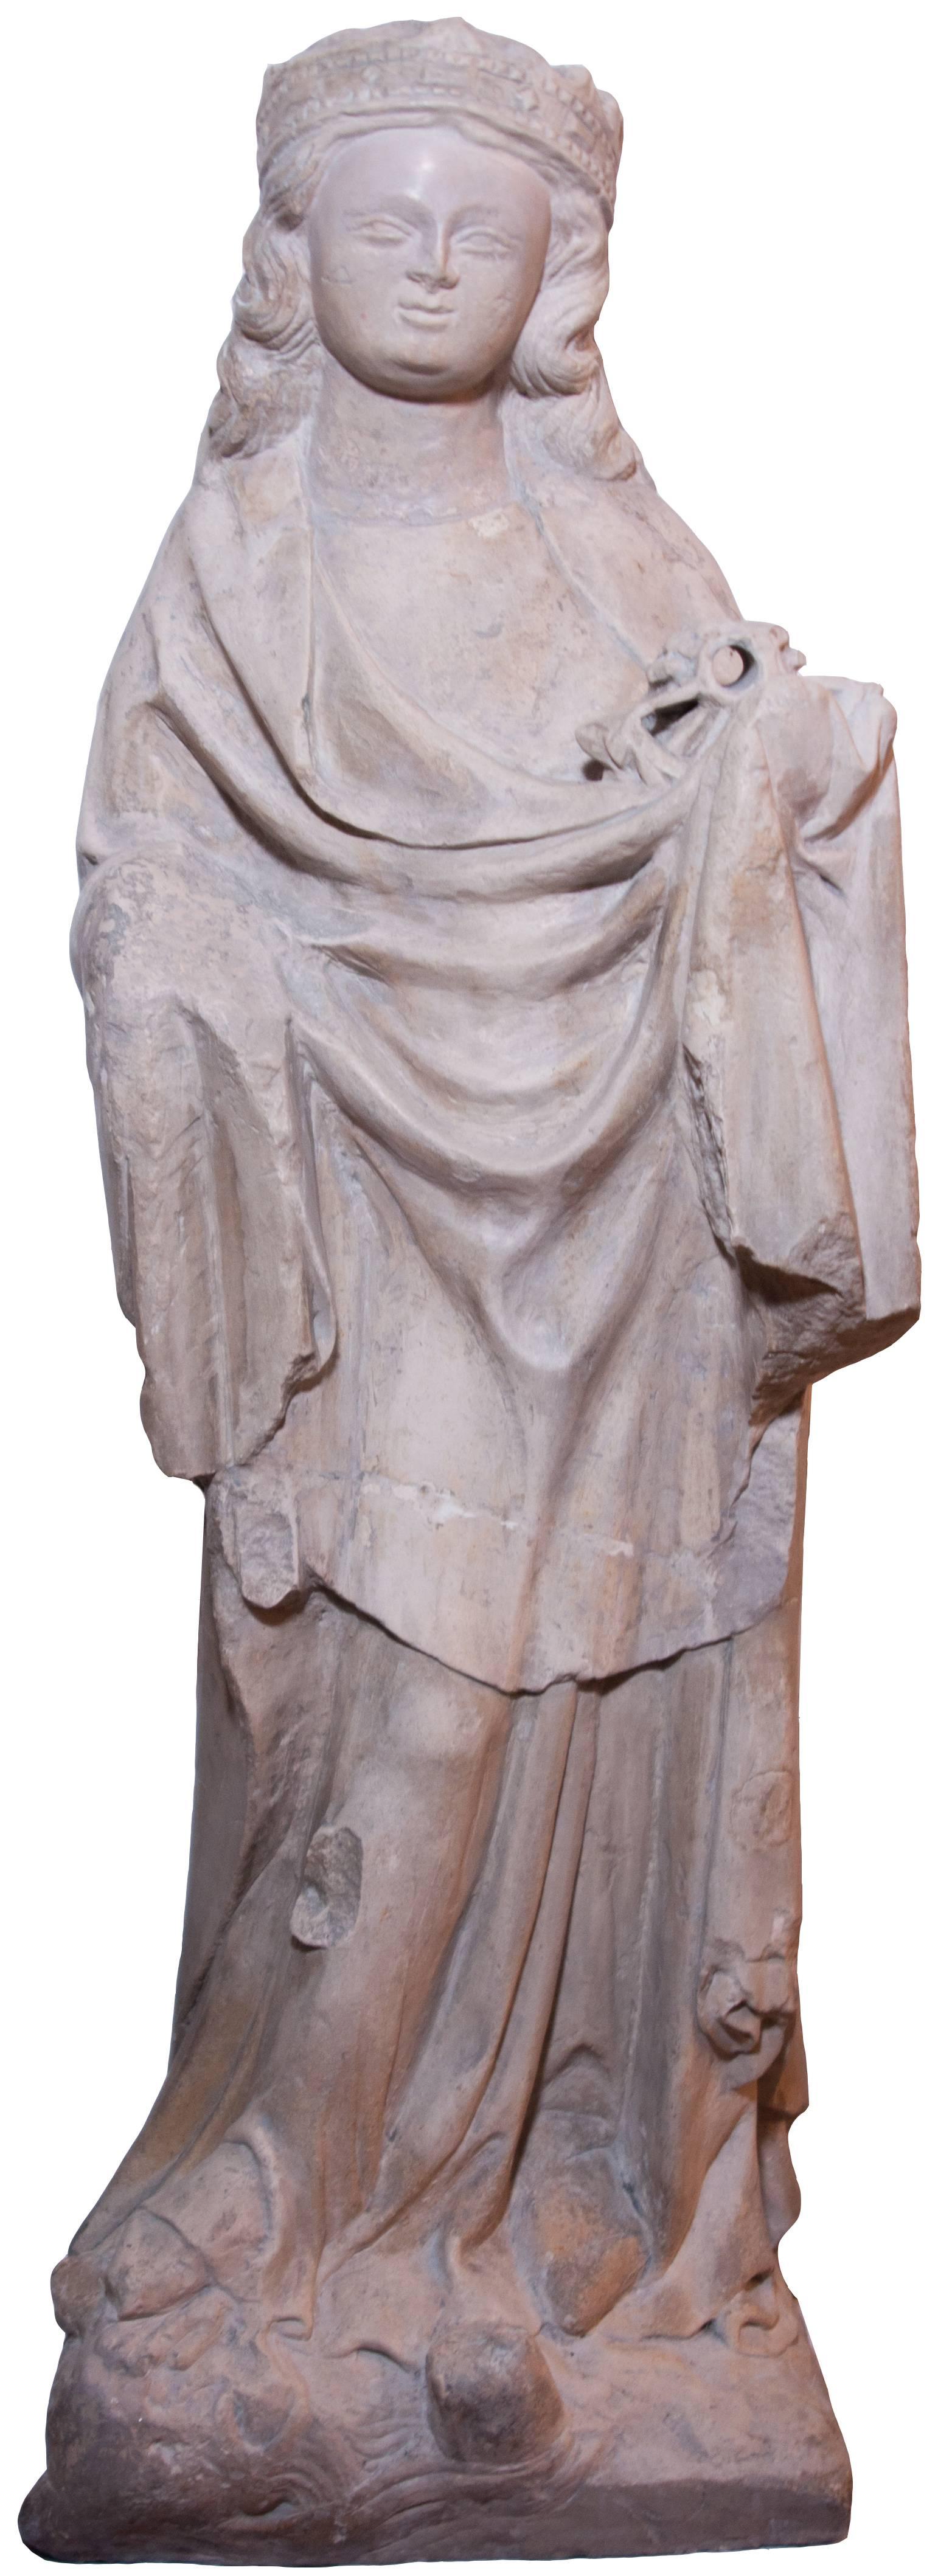 Unknown Figurative Sculpture - Limestone statue of St. Catherine, early XIV th century